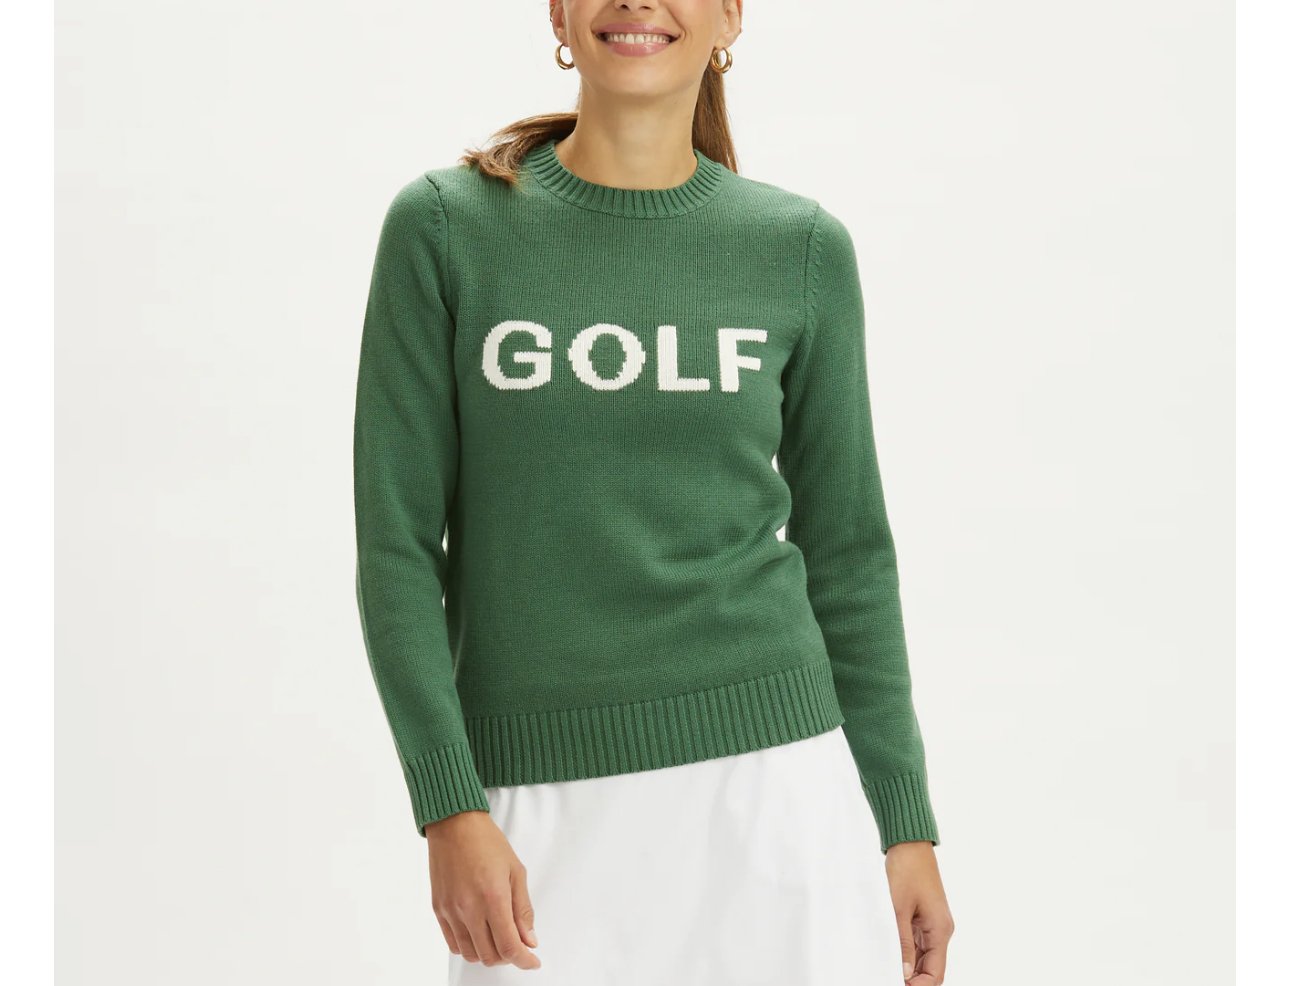 https://www.renwicksport.com/collections/all-products/products/golf-sweater-1